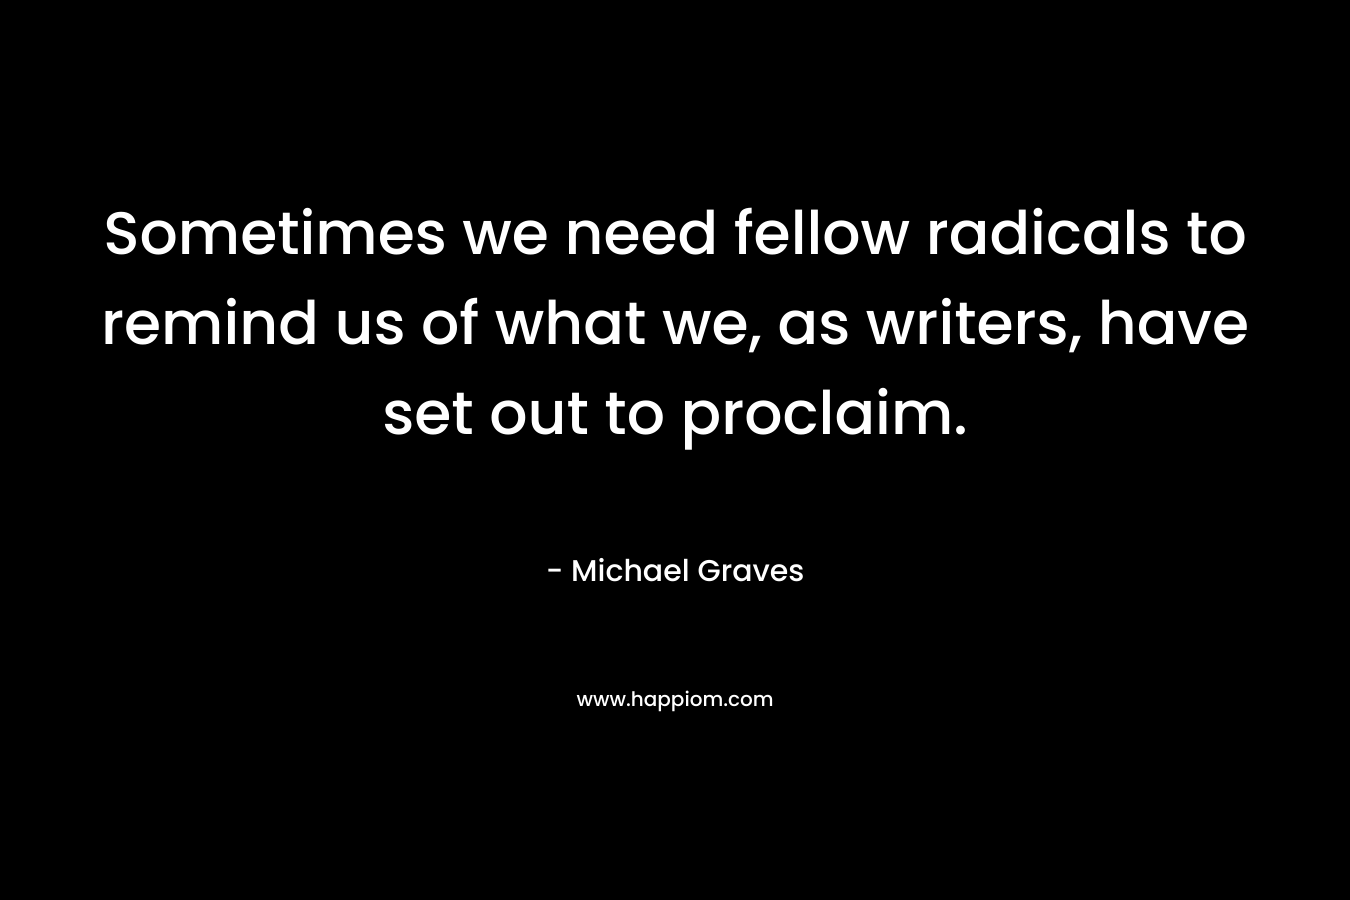 Sometimes we need fellow radicals to remind us of what we, as writers, have set out to proclaim.